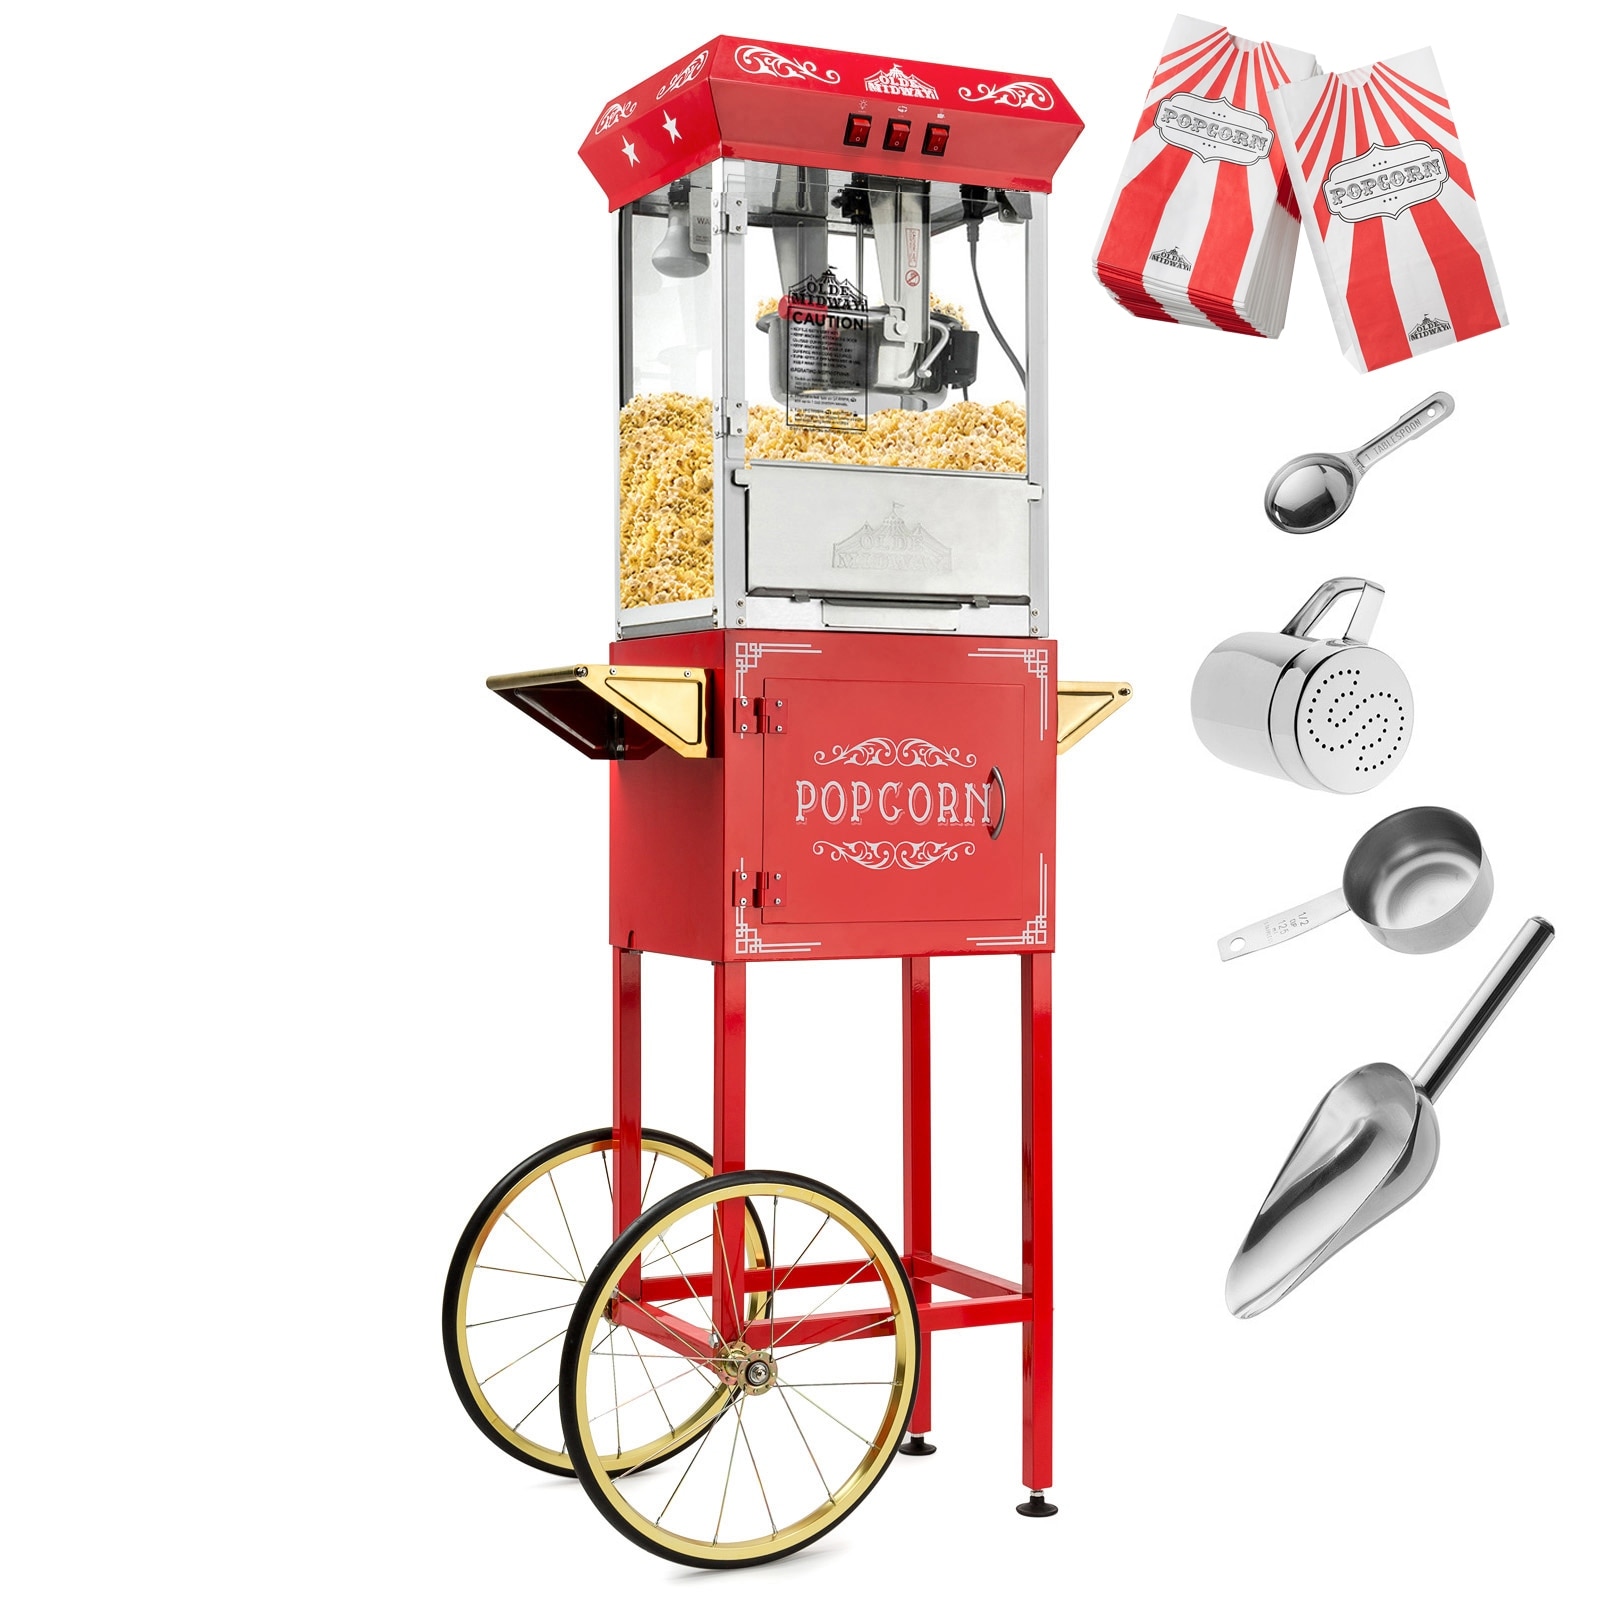 https://ak1.ostkcdn.com/images/products/is/images/direct/cf5648192acfa070ea4b79b41f8ea3ecb9f0eed4/Vintage-Style-Popcorn-Machine-Maker-Popper-w--Cart-and-10-Ounce-Kettle.jpg